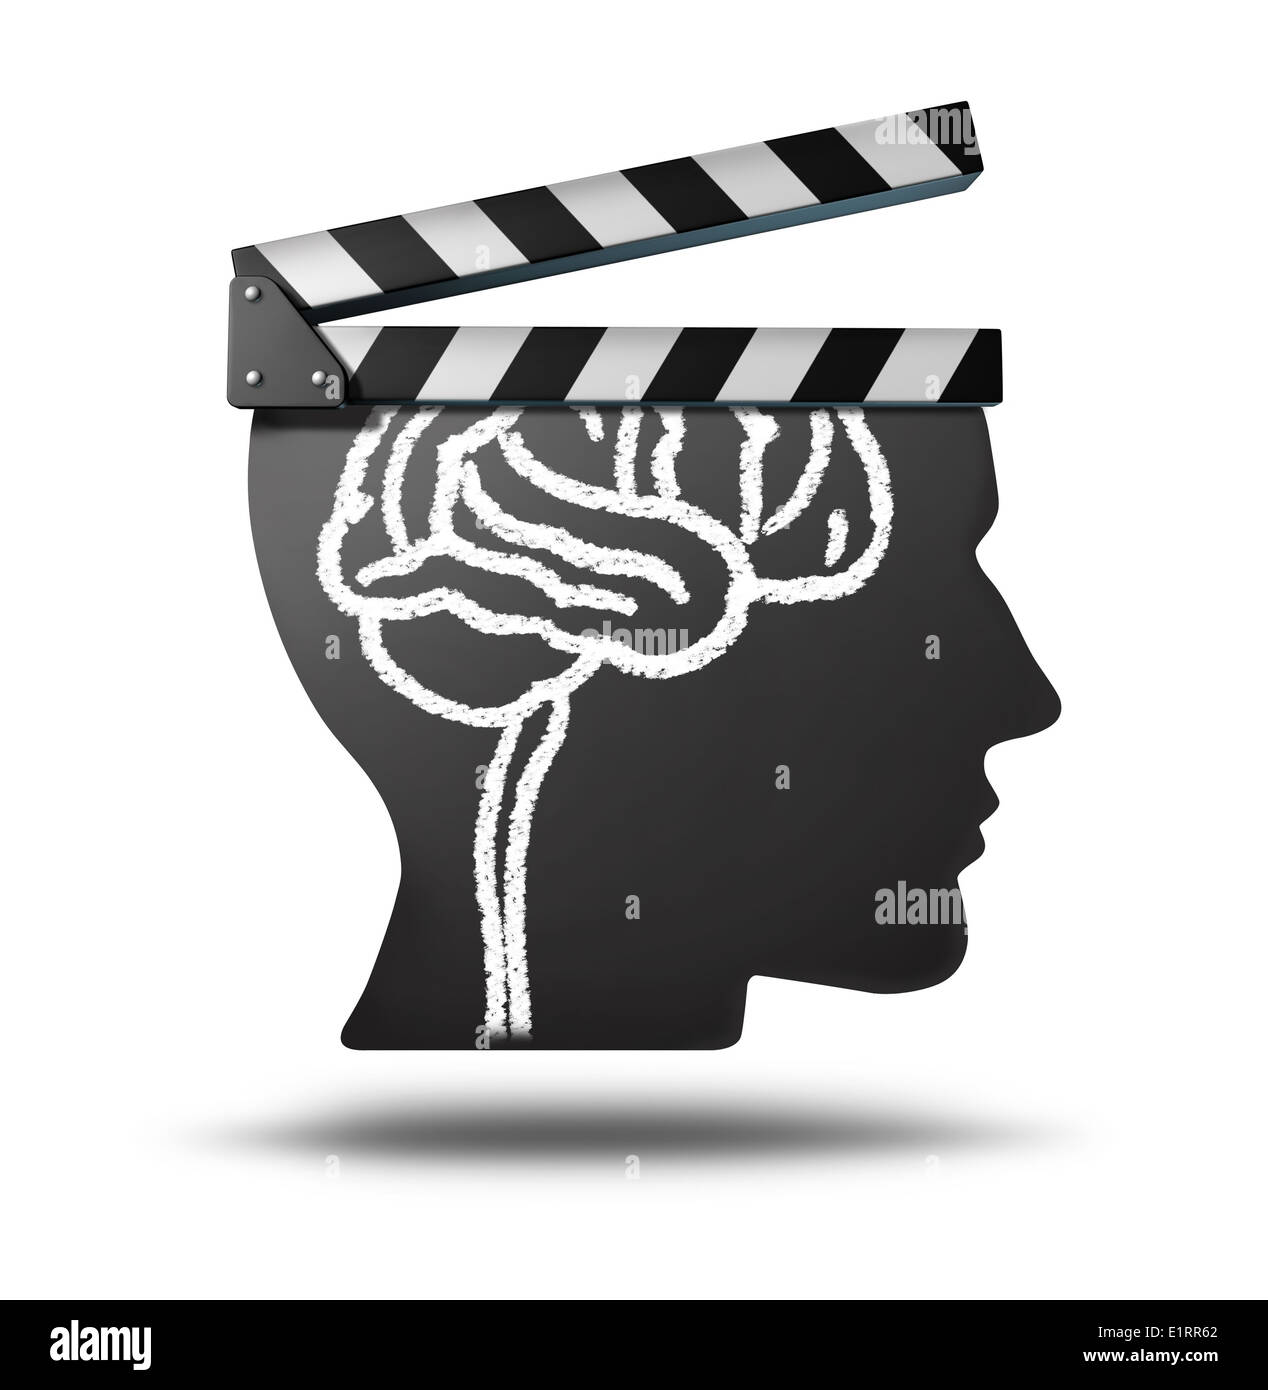 Education videos and learning videos online as a tool for educating and teaching new skills through entertainment media movies as documentaries and biography or history clips on the internet or at a theatre cinema. Stock Photo